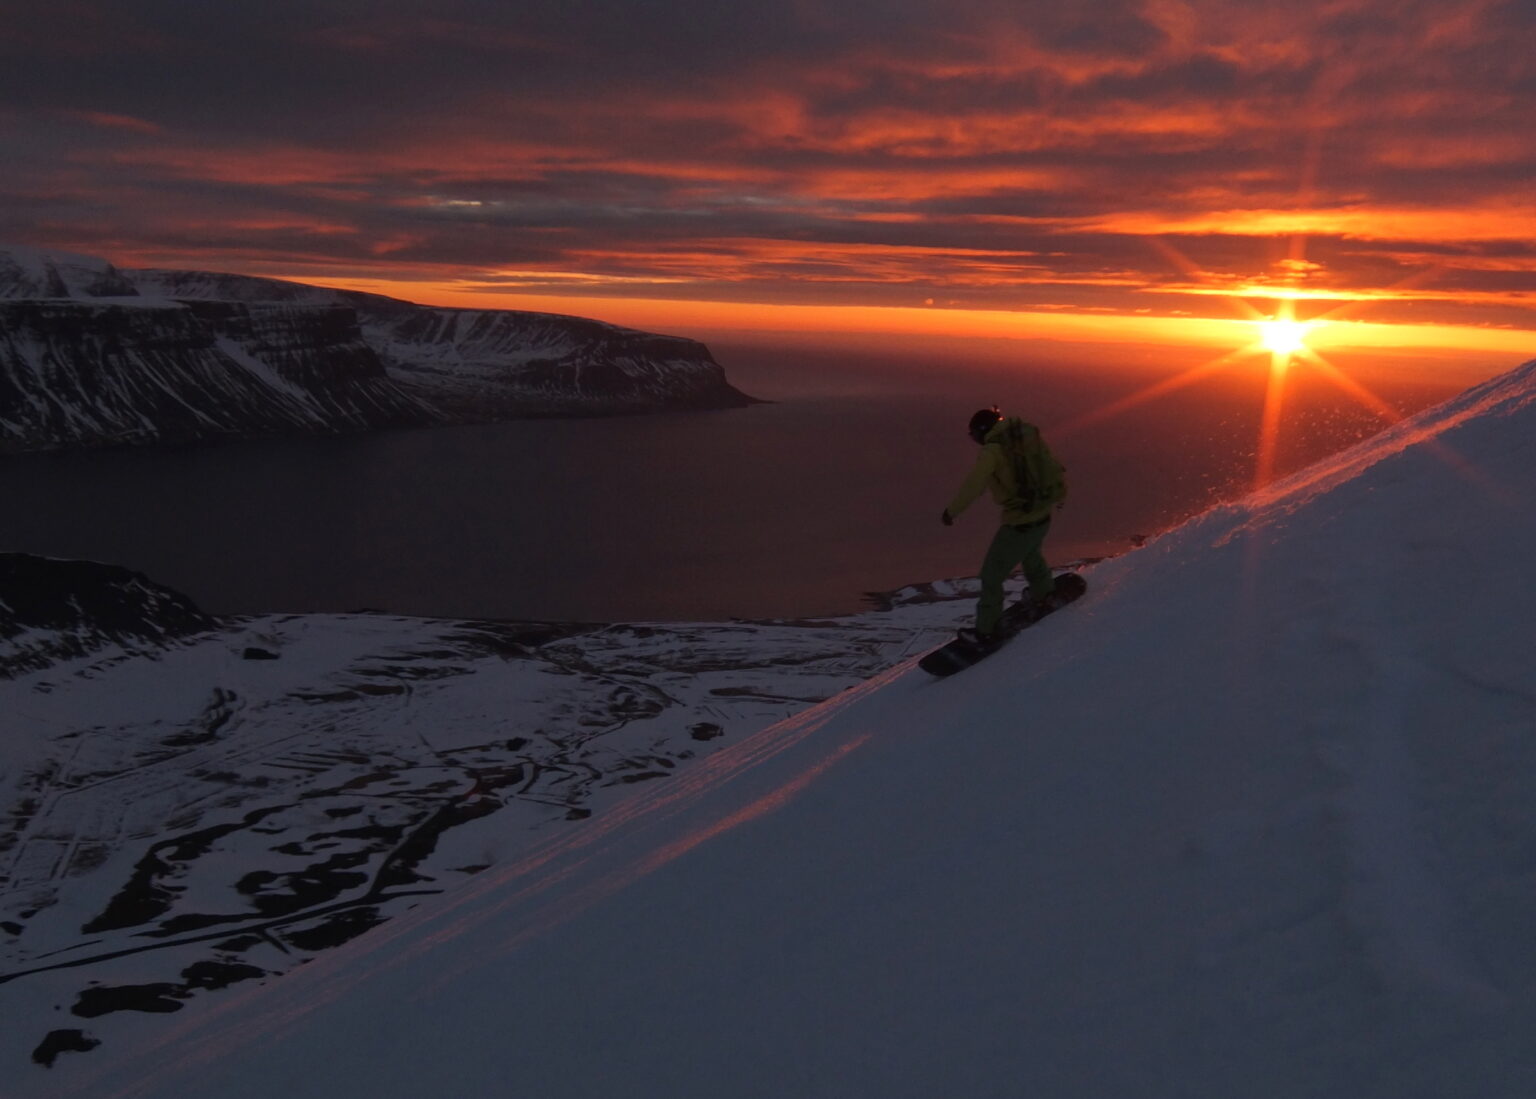 Snowboarding down to the sunset alpenglow in the Dýrafjörður area of the Westfjords of Iceland